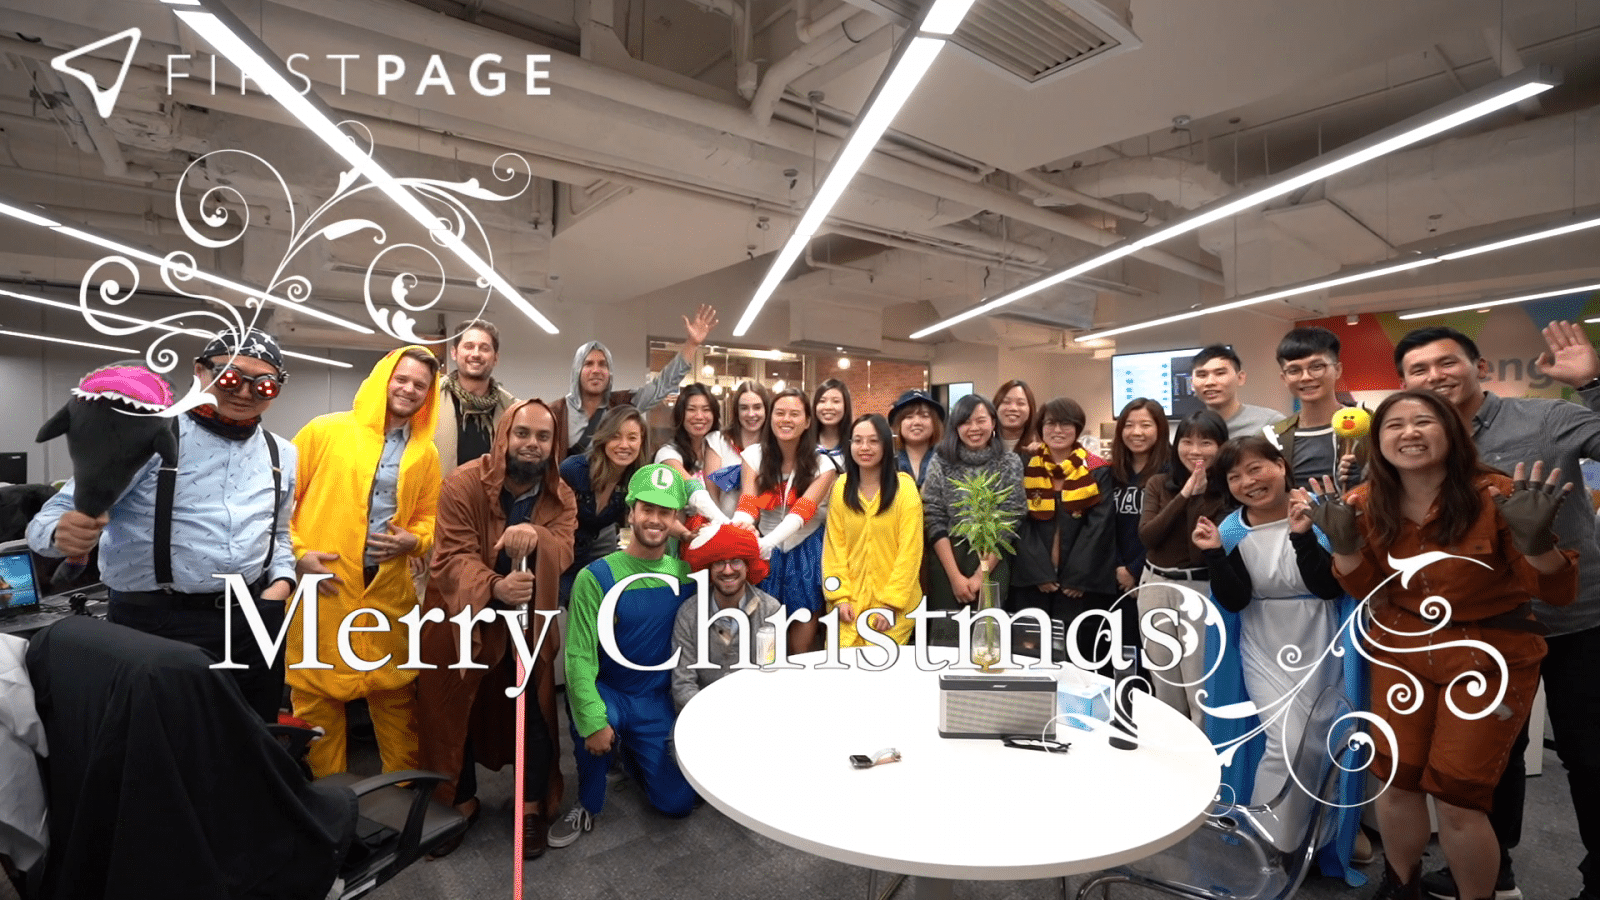 Merry Christmas from First Page